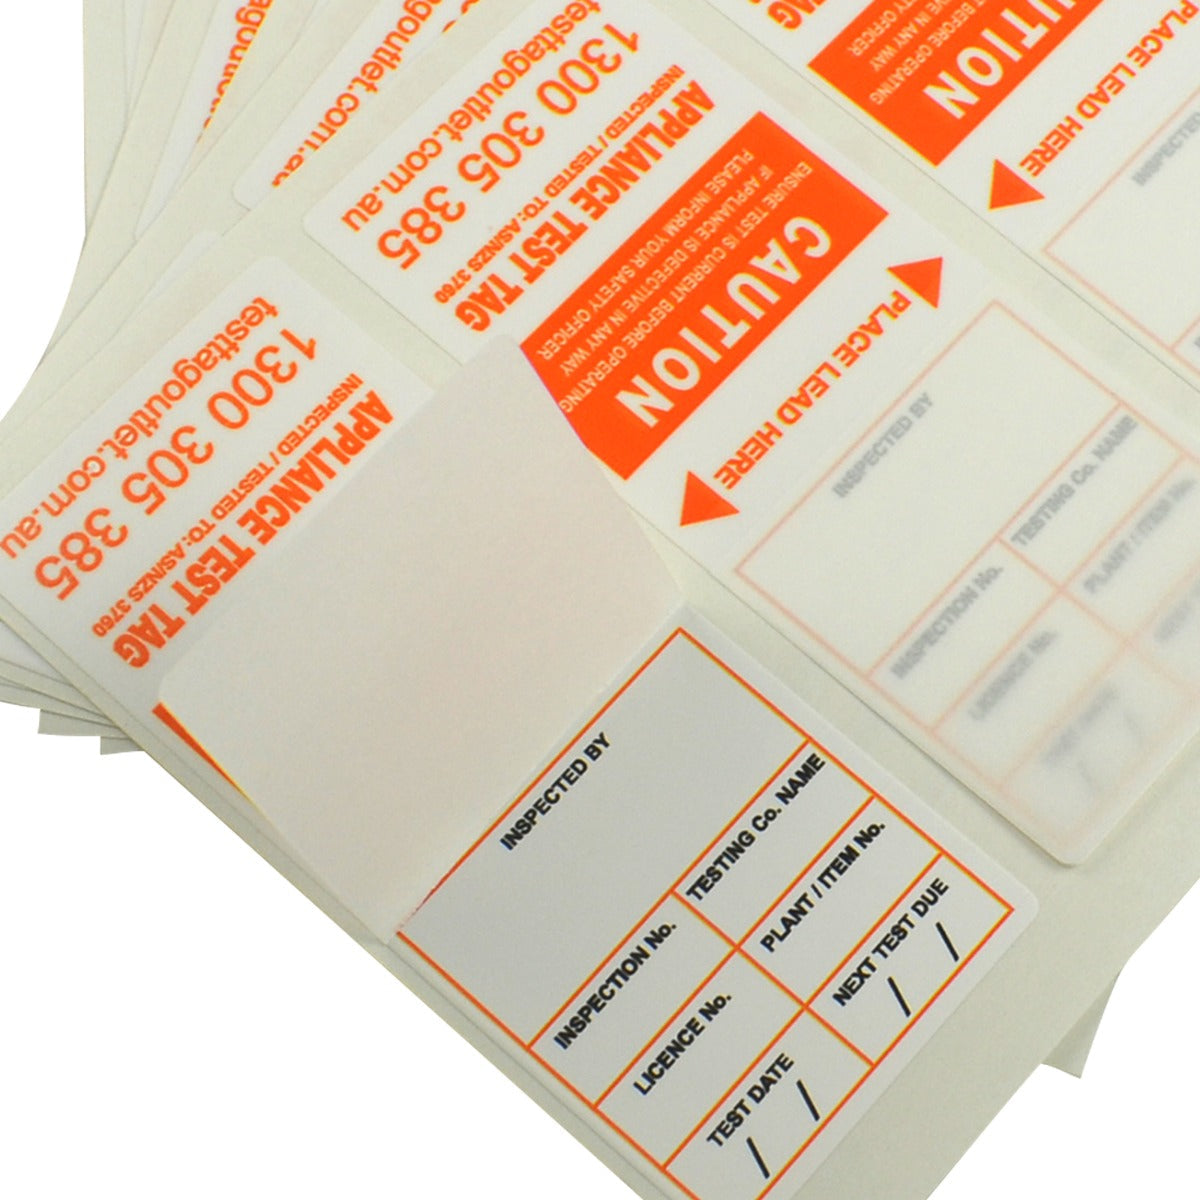 Weather Resistant, waterproof Heavy Duty Orange Electrical Test Tags that complies with AS/NZS 3760 standards